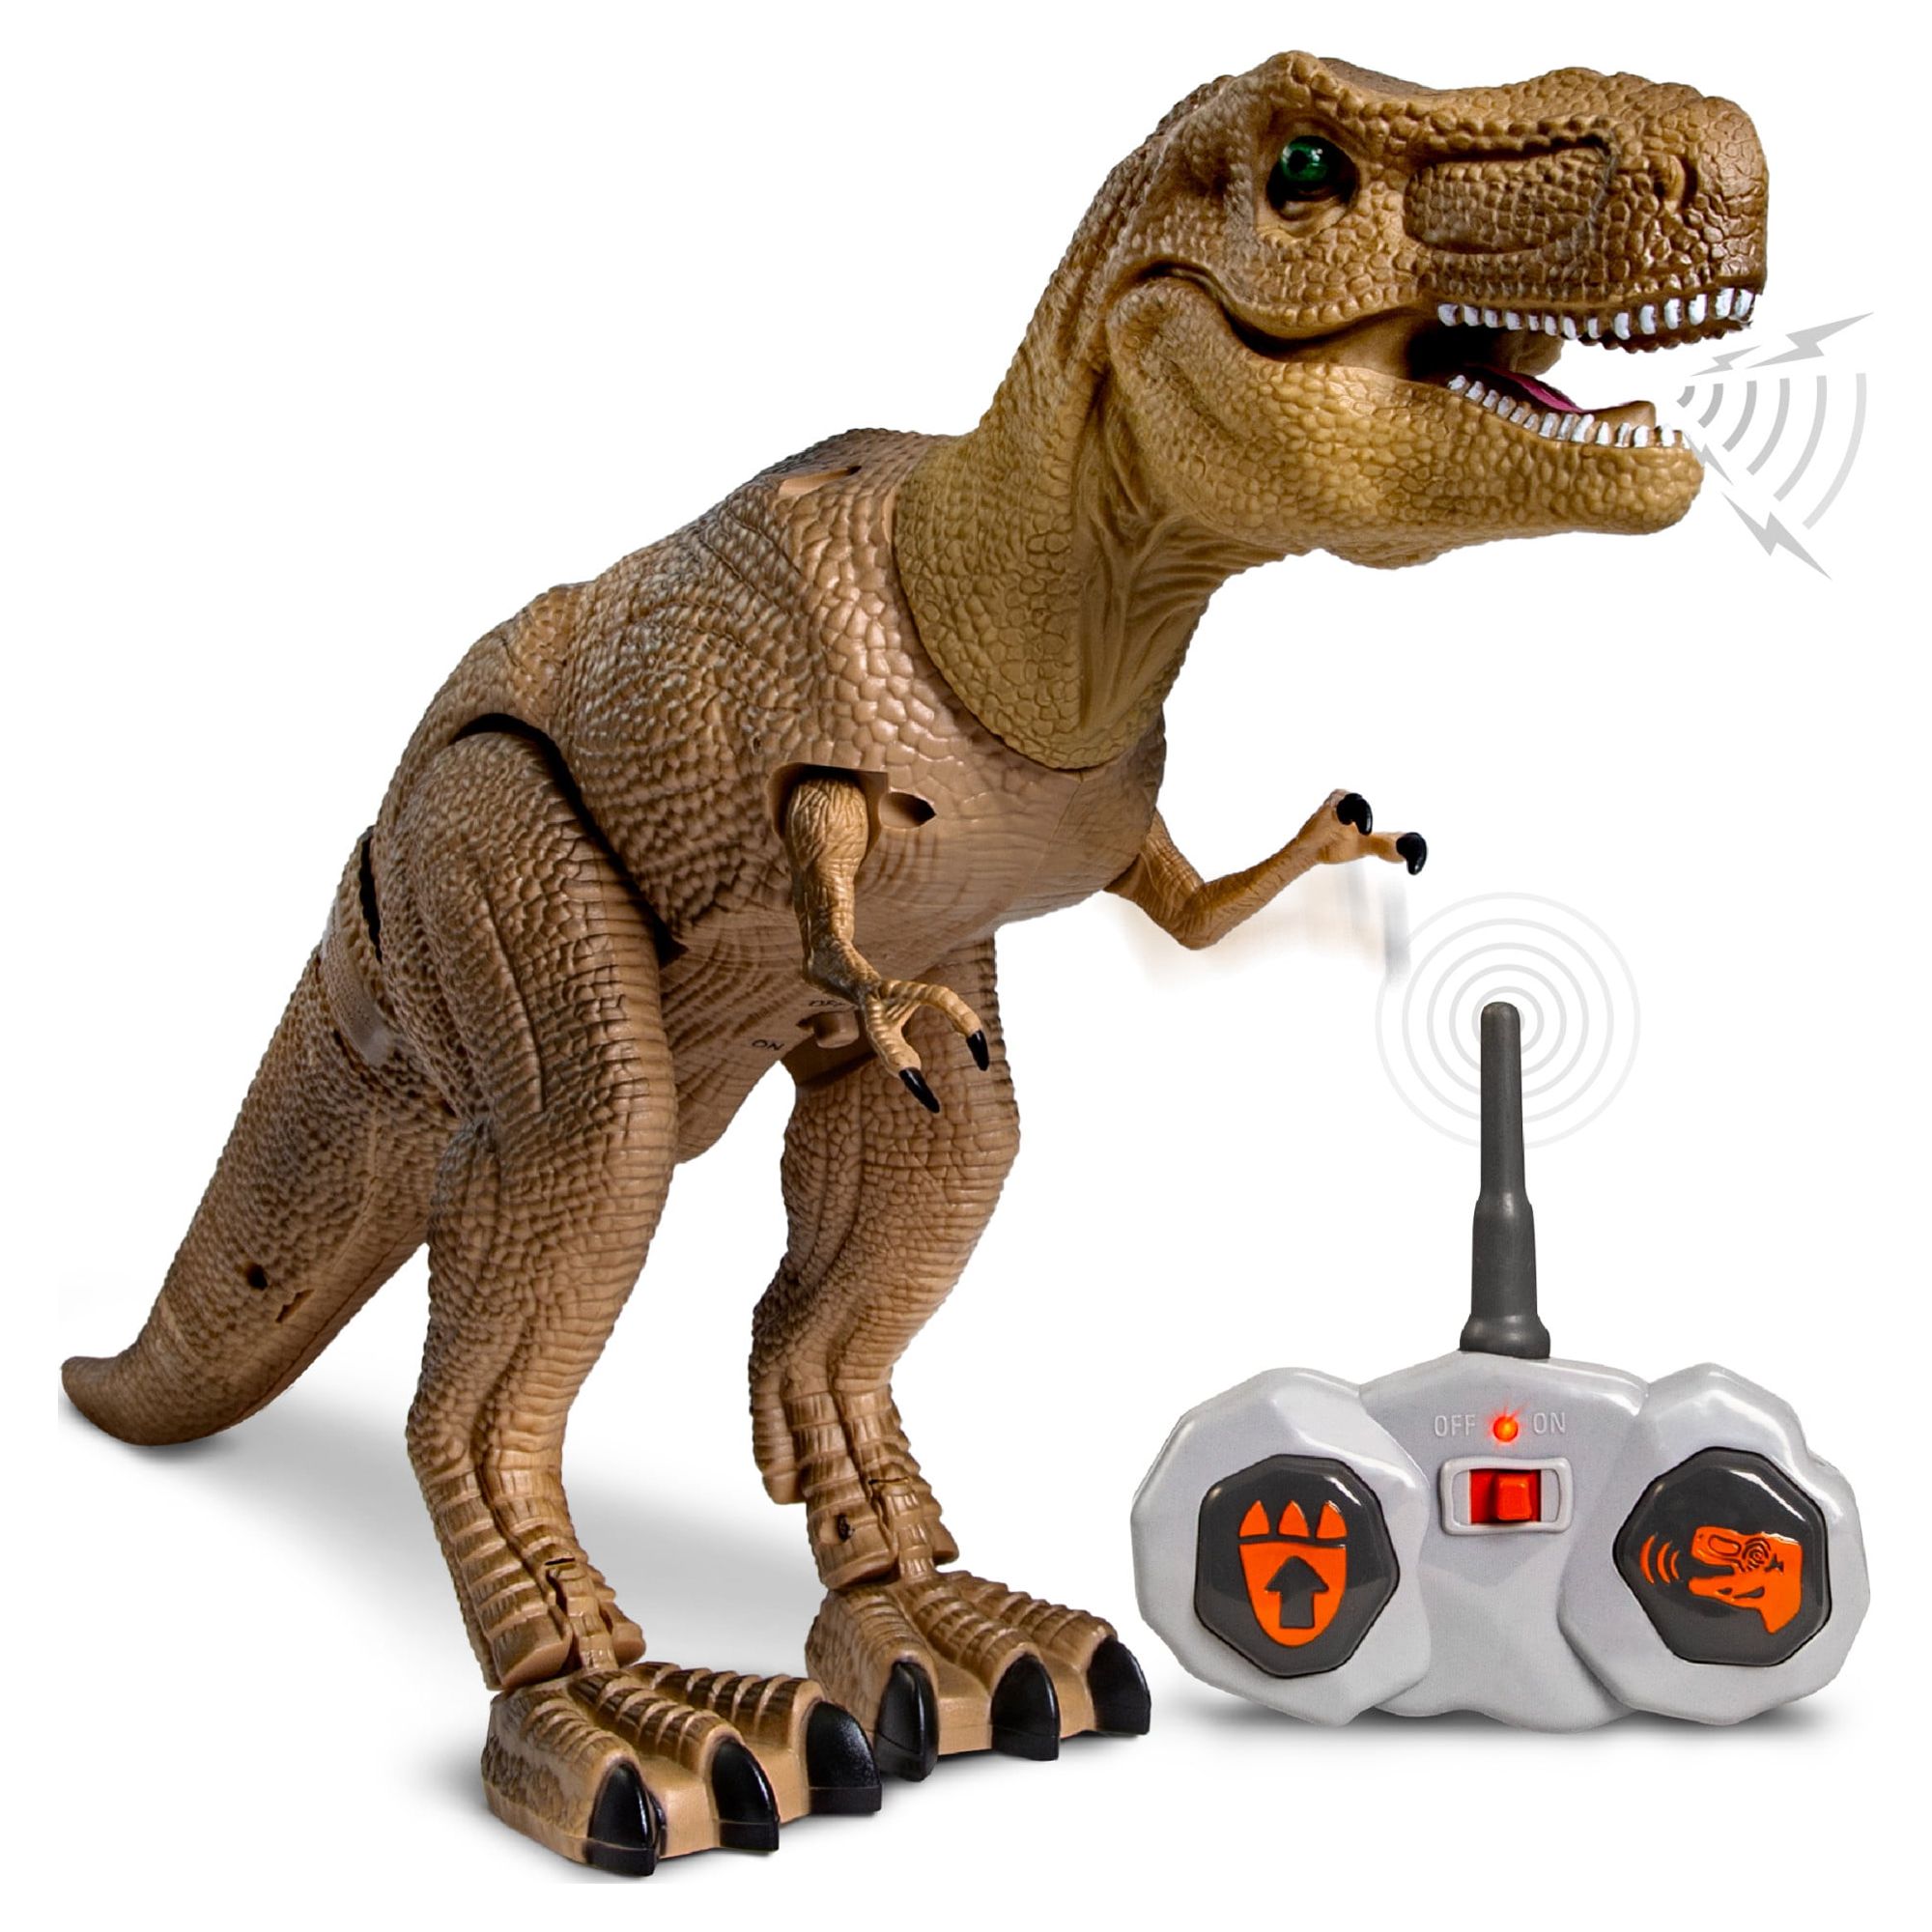 Discovery Kids Robotic RC T-Rex Action Dinosaur, with Wireless Remote Control & Moving Parts, Brown - image 1 of 12